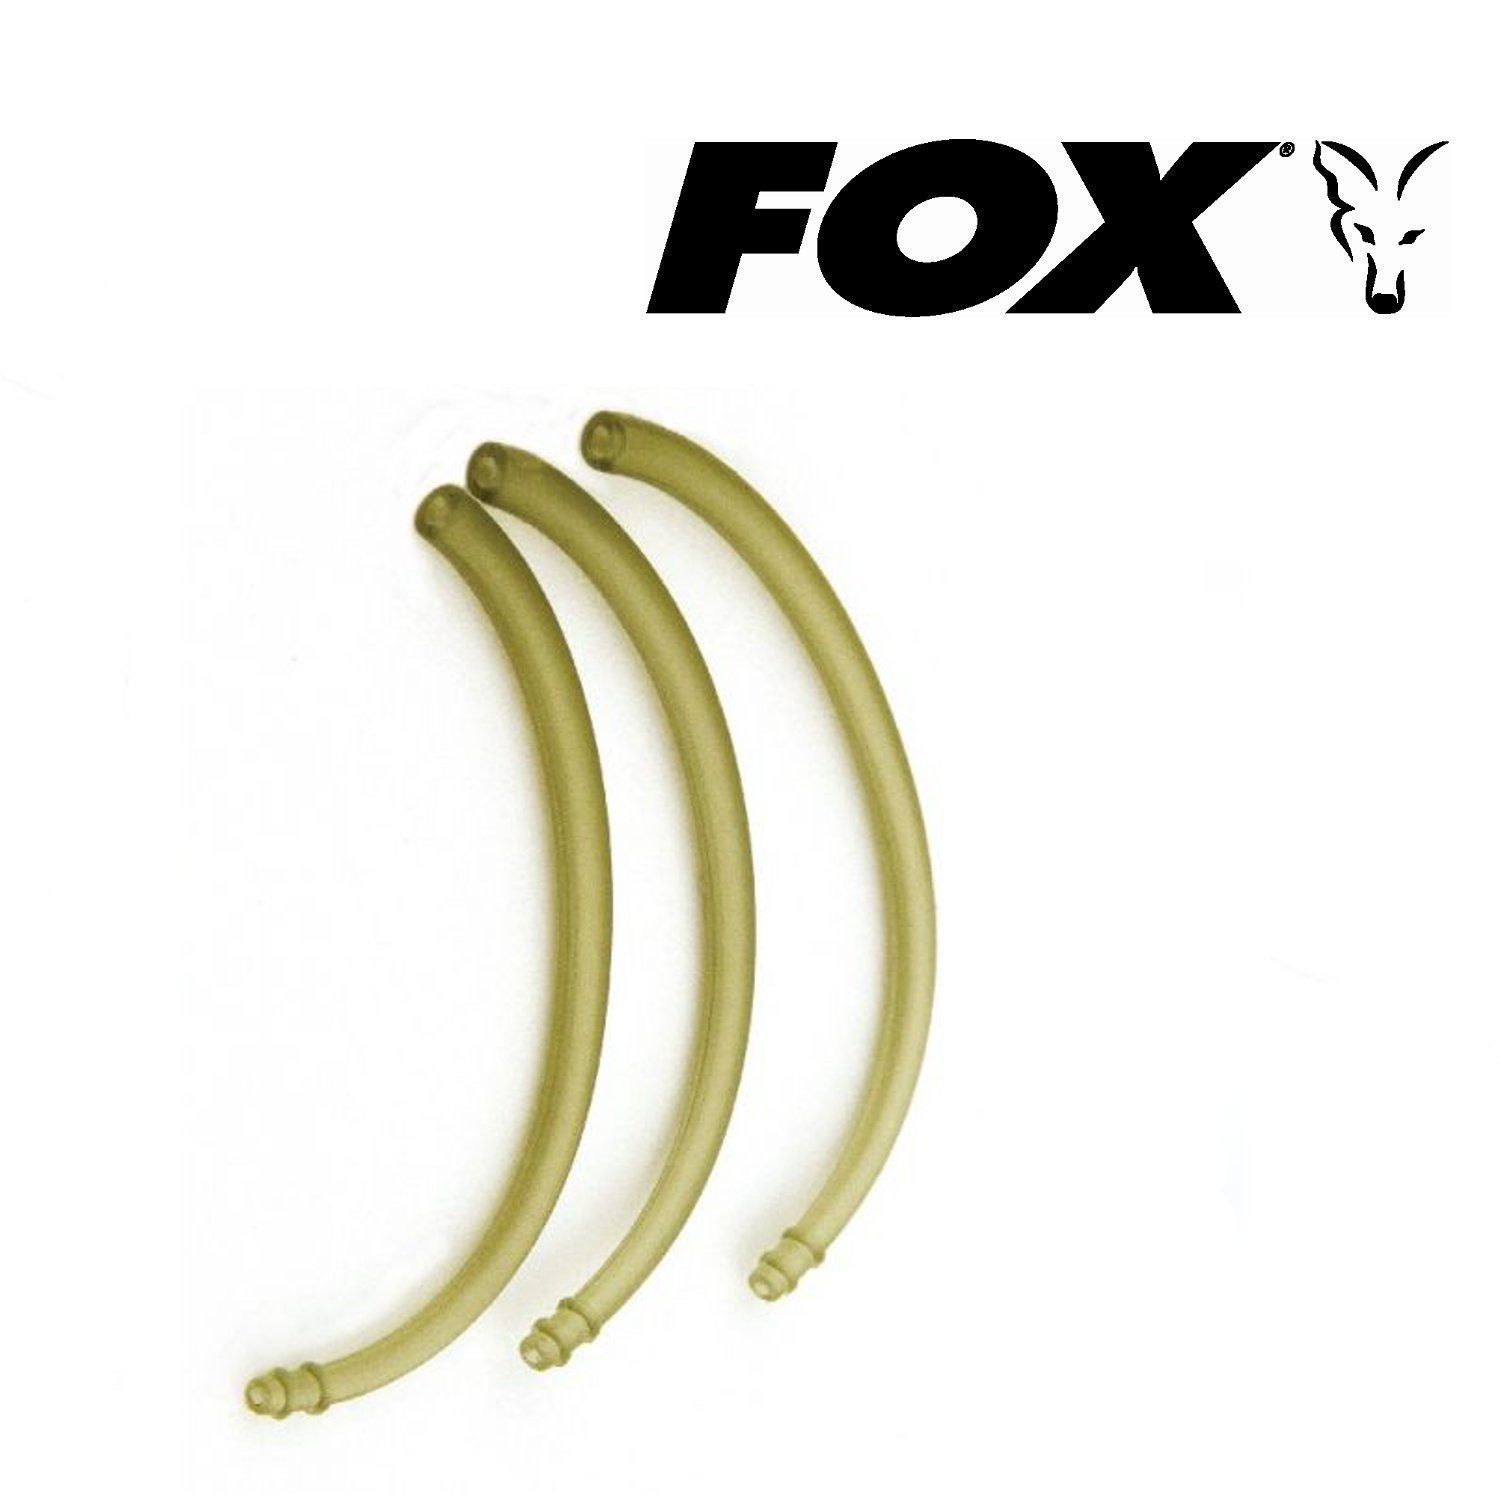 Fox Camo Green  brown Withy / Curve Shank Adaptores for Hook Size 6 - 2